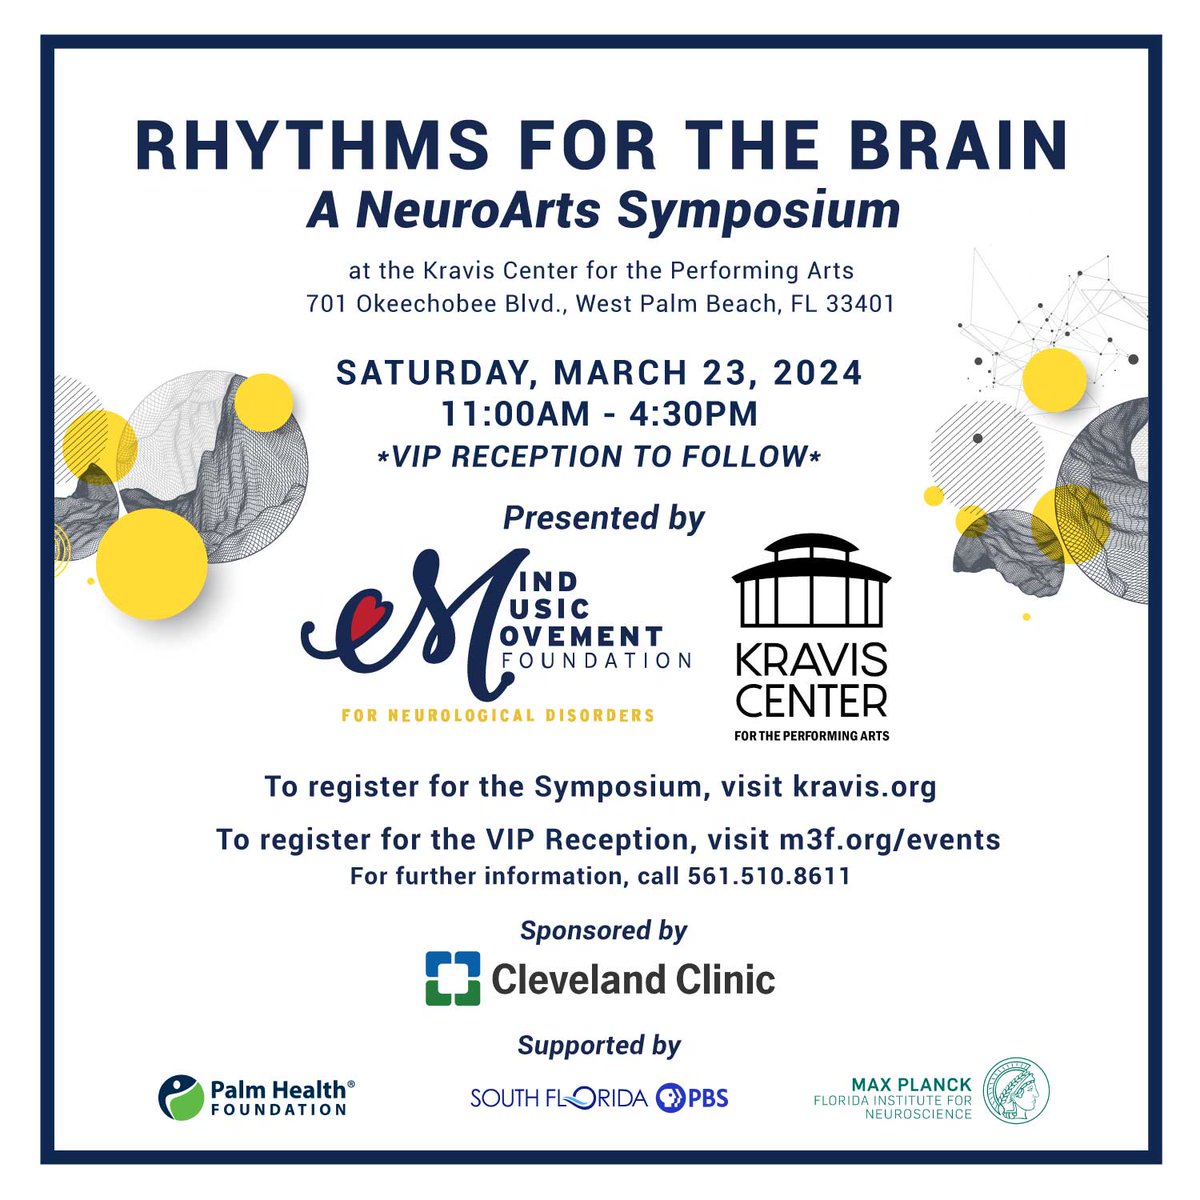 March 23: Susan Magsamen will be speaking at 'Rhythms for the Brain: An Interactive Neuroarts Symposium' at the @kraviscenter. This event will focus on how the arts measurably change the body, brain and behavior, and more. #mindmusicmovement tinyurl.com/5x8vfnw3